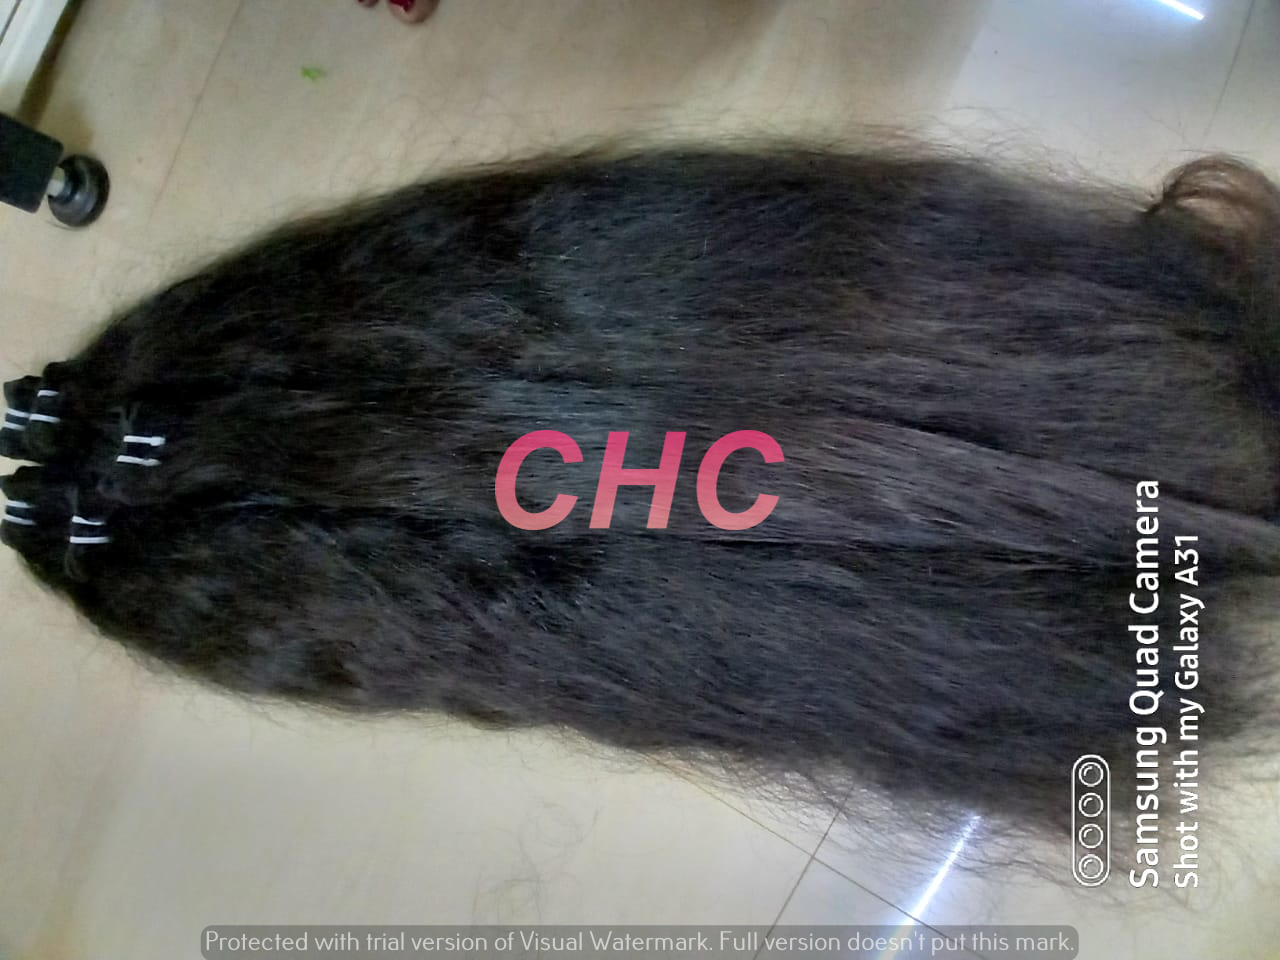 Indian Virgin Remy Straight Human Hair Extensions